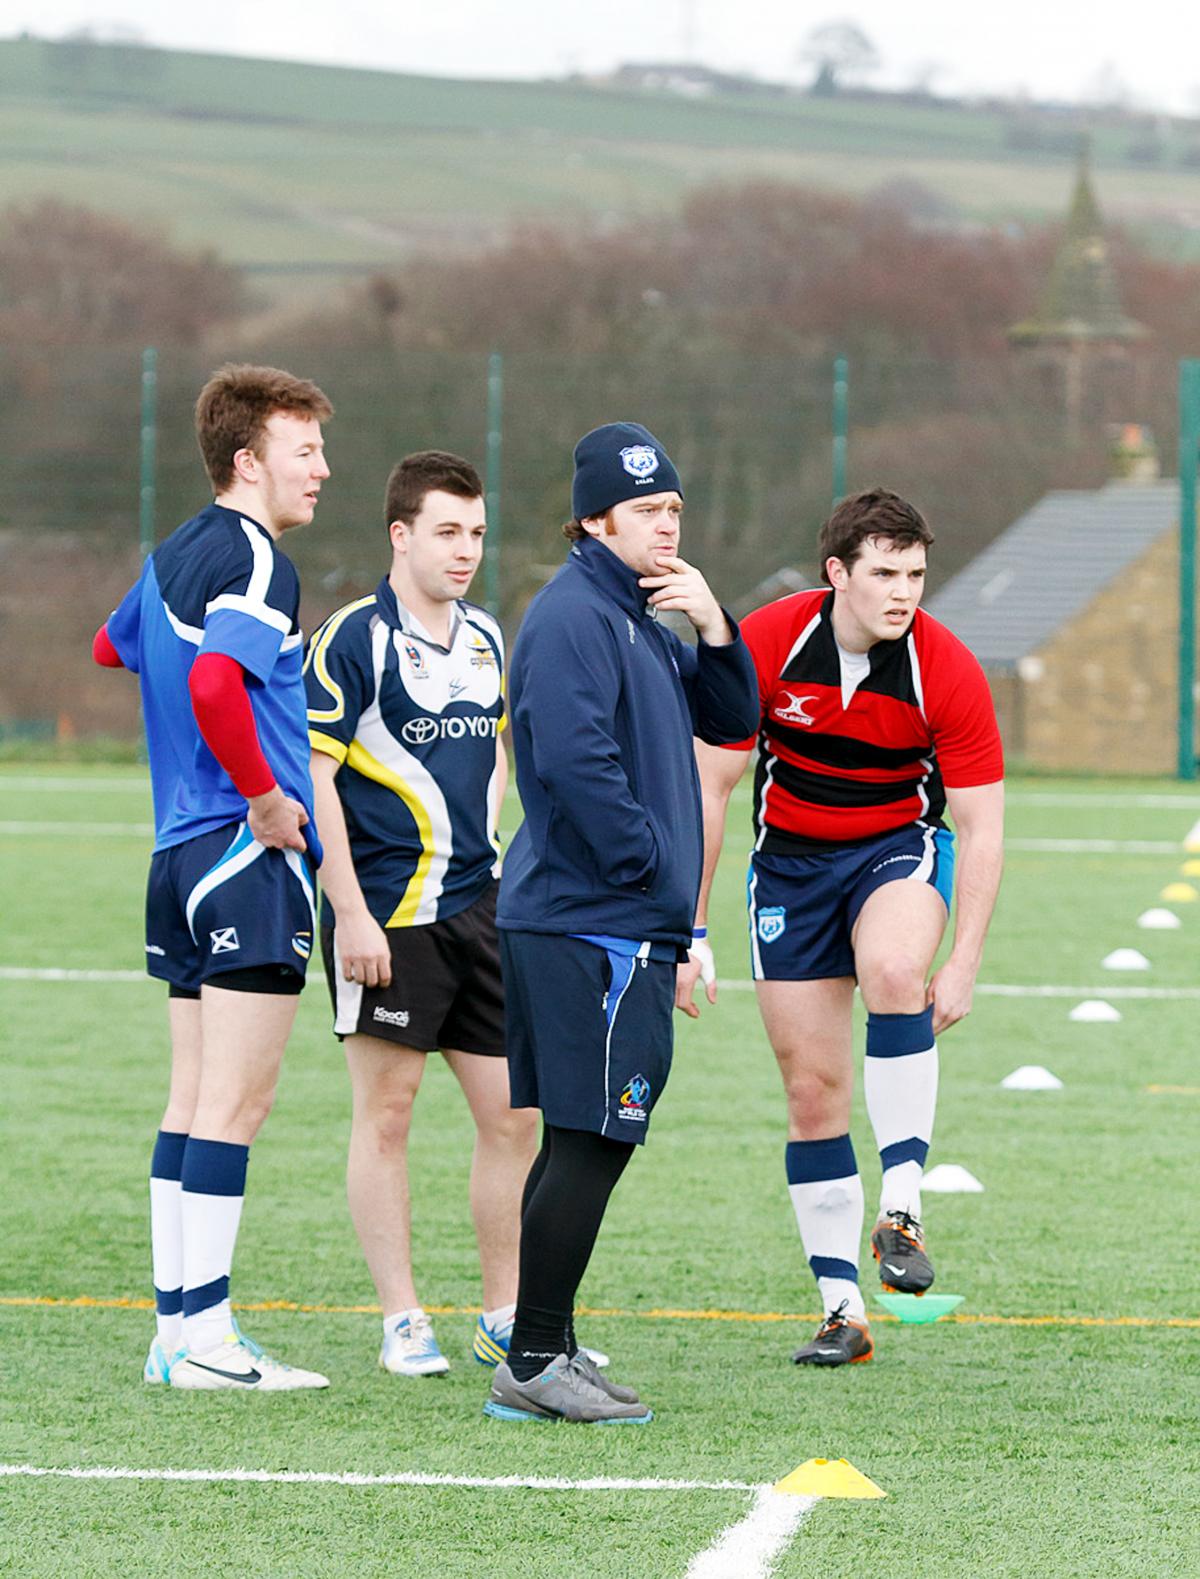 Scotland Rugby League training at St Catherine's Academy